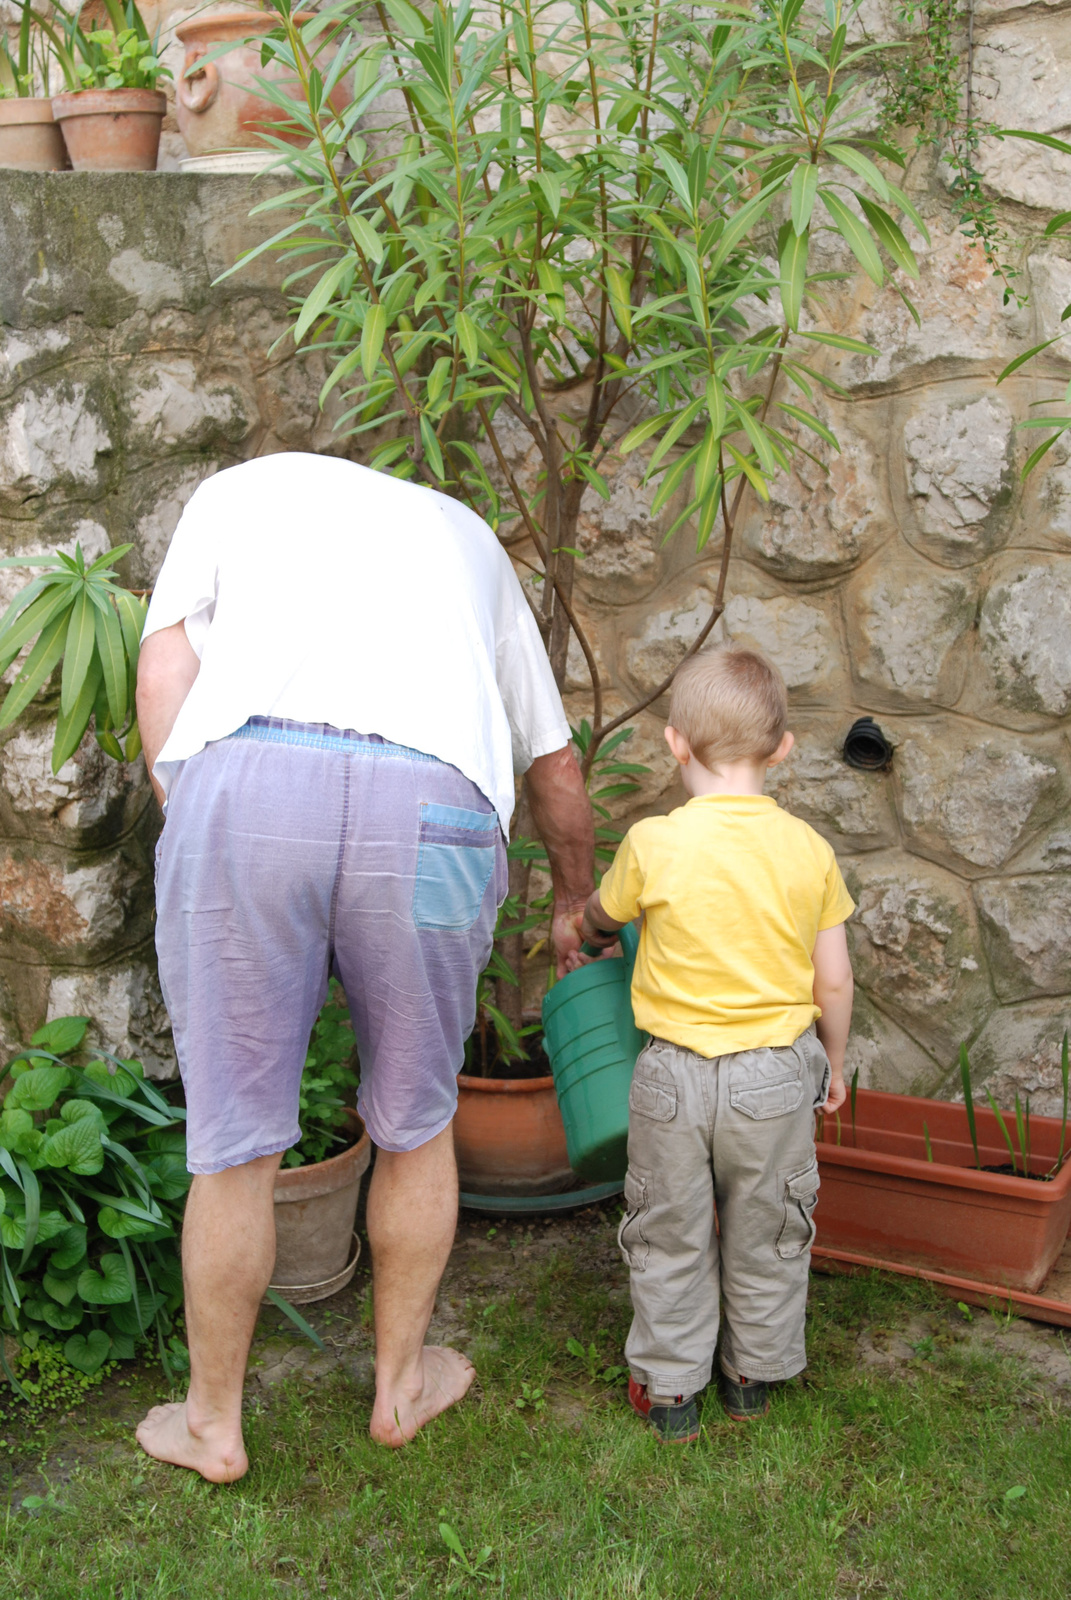 Watering with a little help